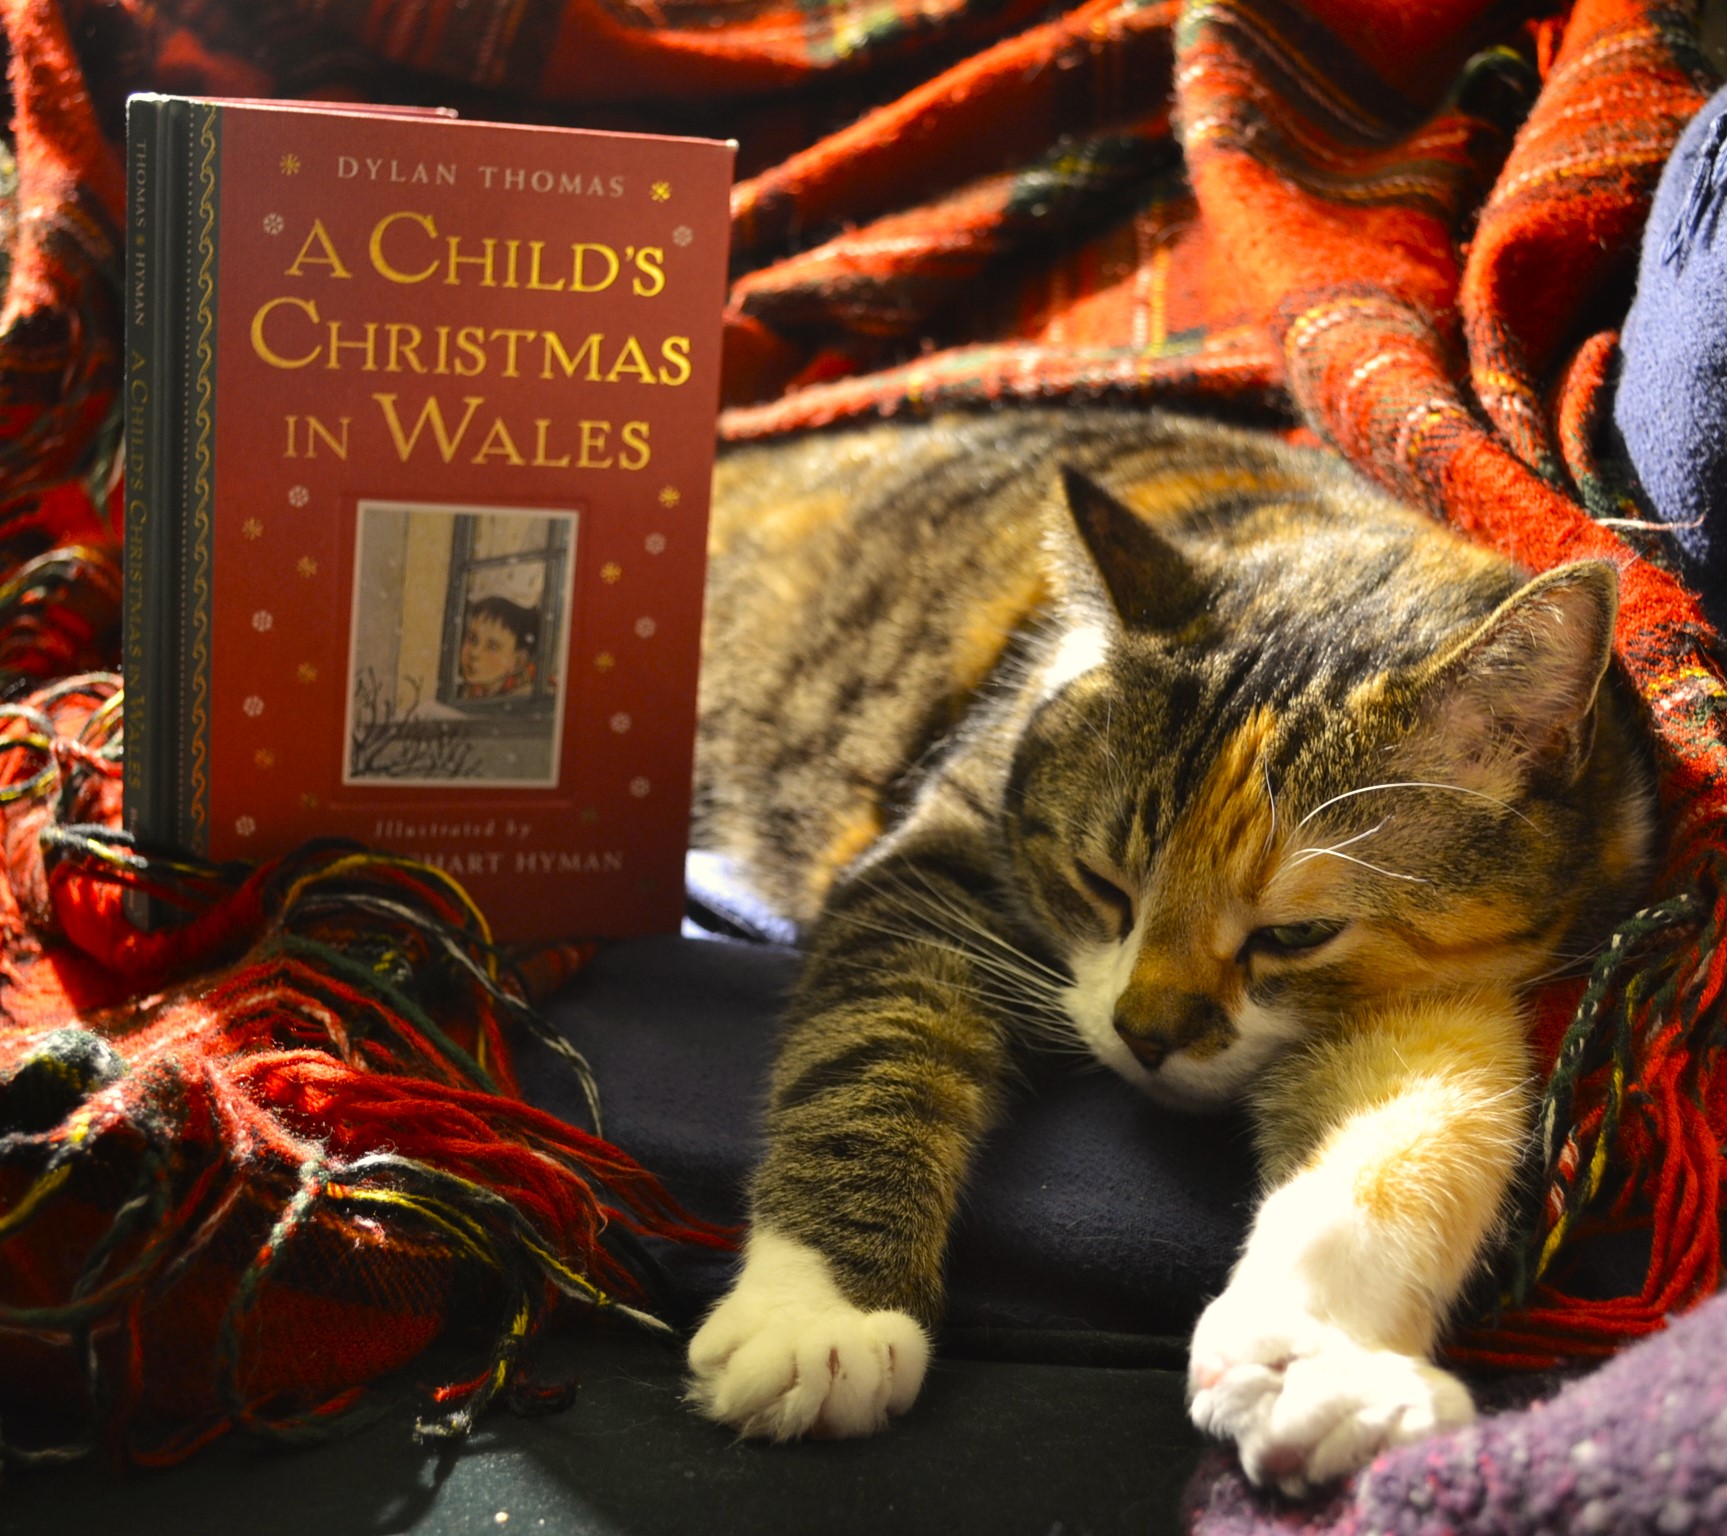 A Child's Christmas in Wales stands beside a calico tabby who has stretched out her paws in front of her.